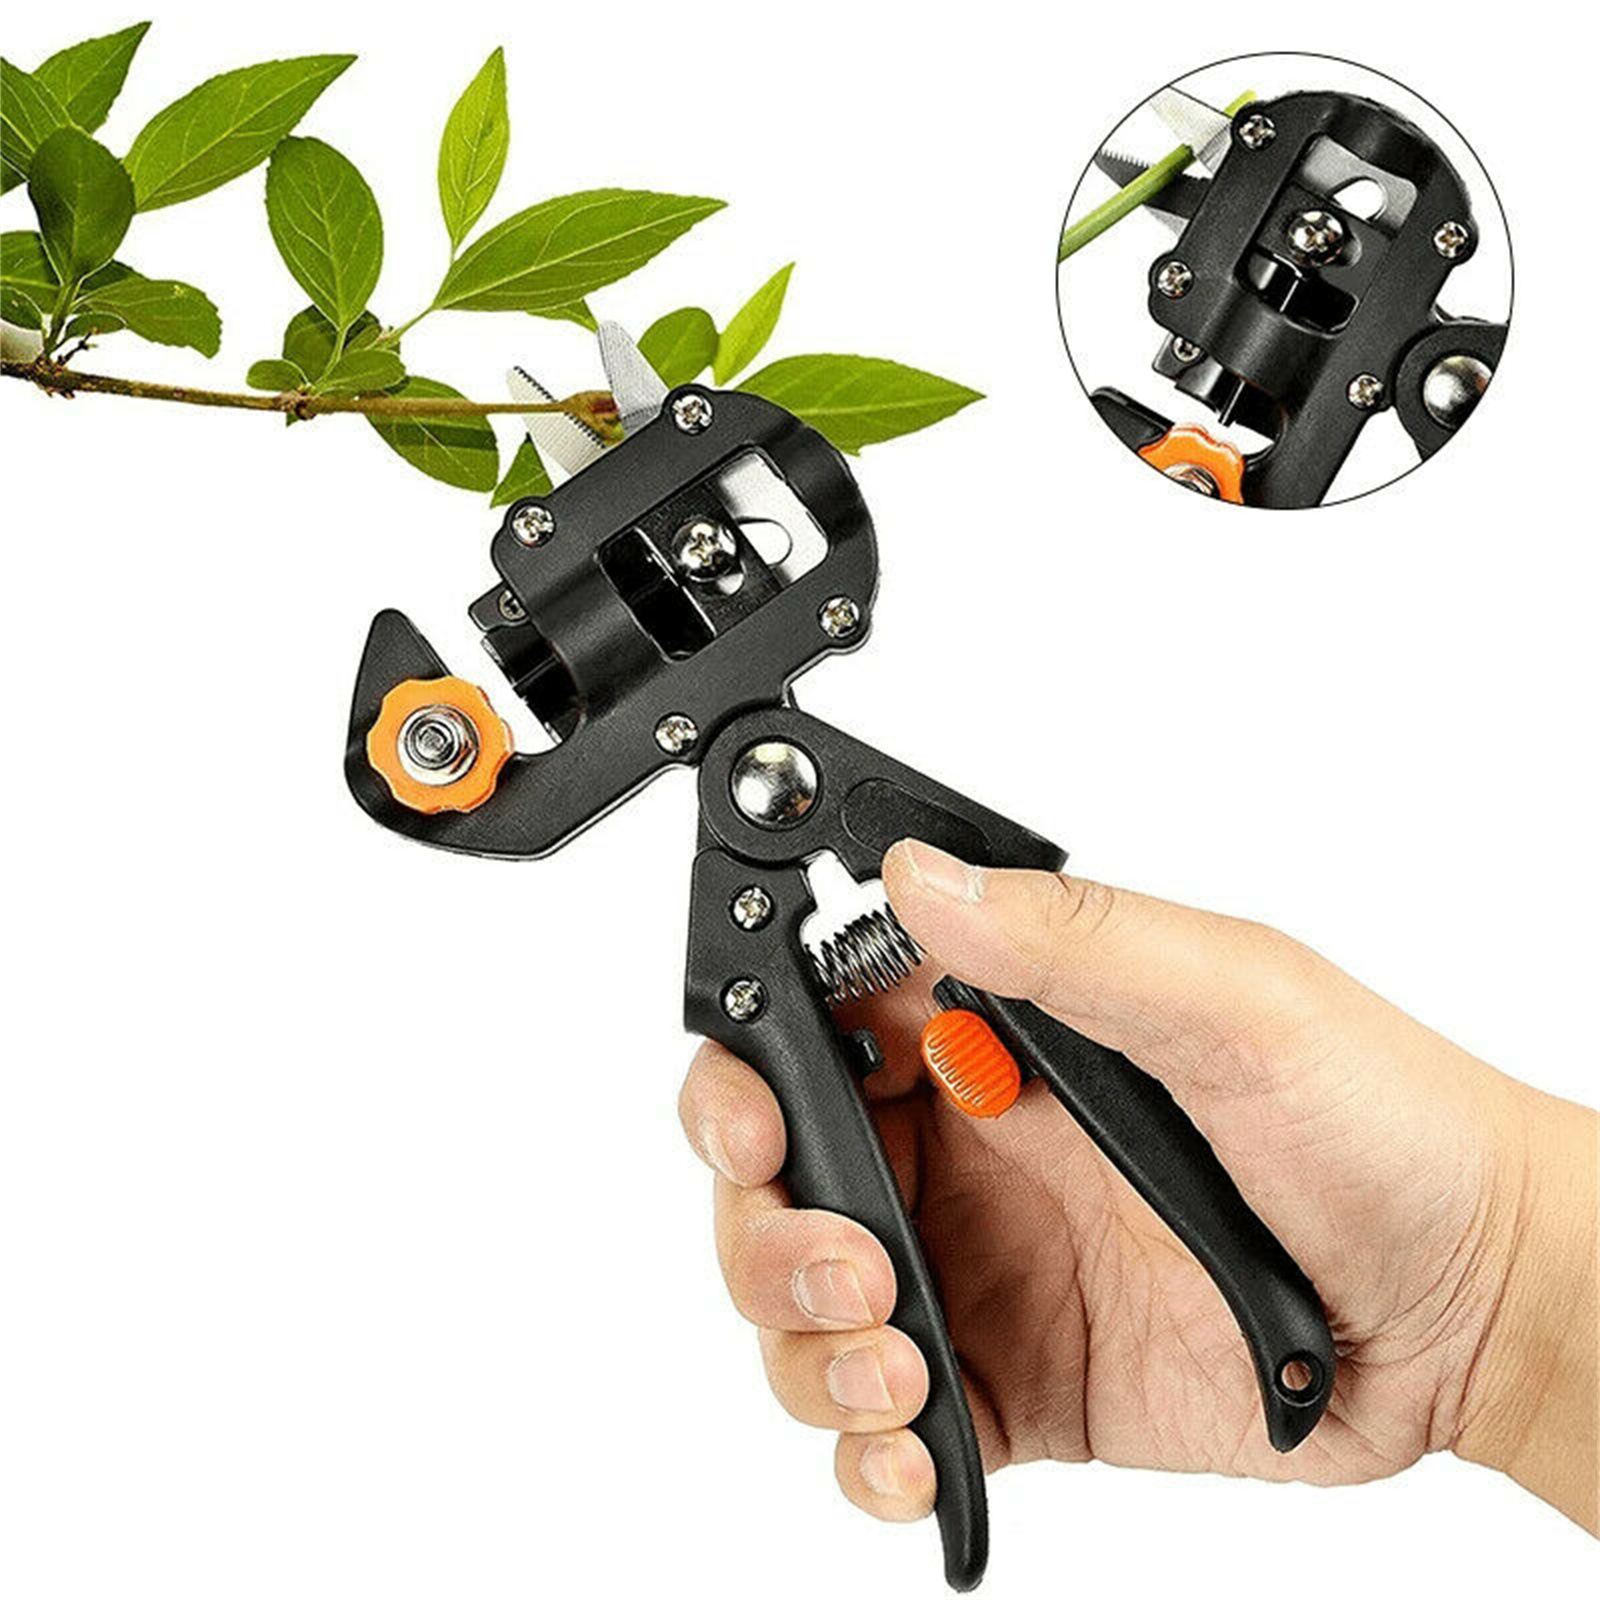 Tree Grafting Knife Accurate Pruning Scissors Shears Garden Cutting Tool Set